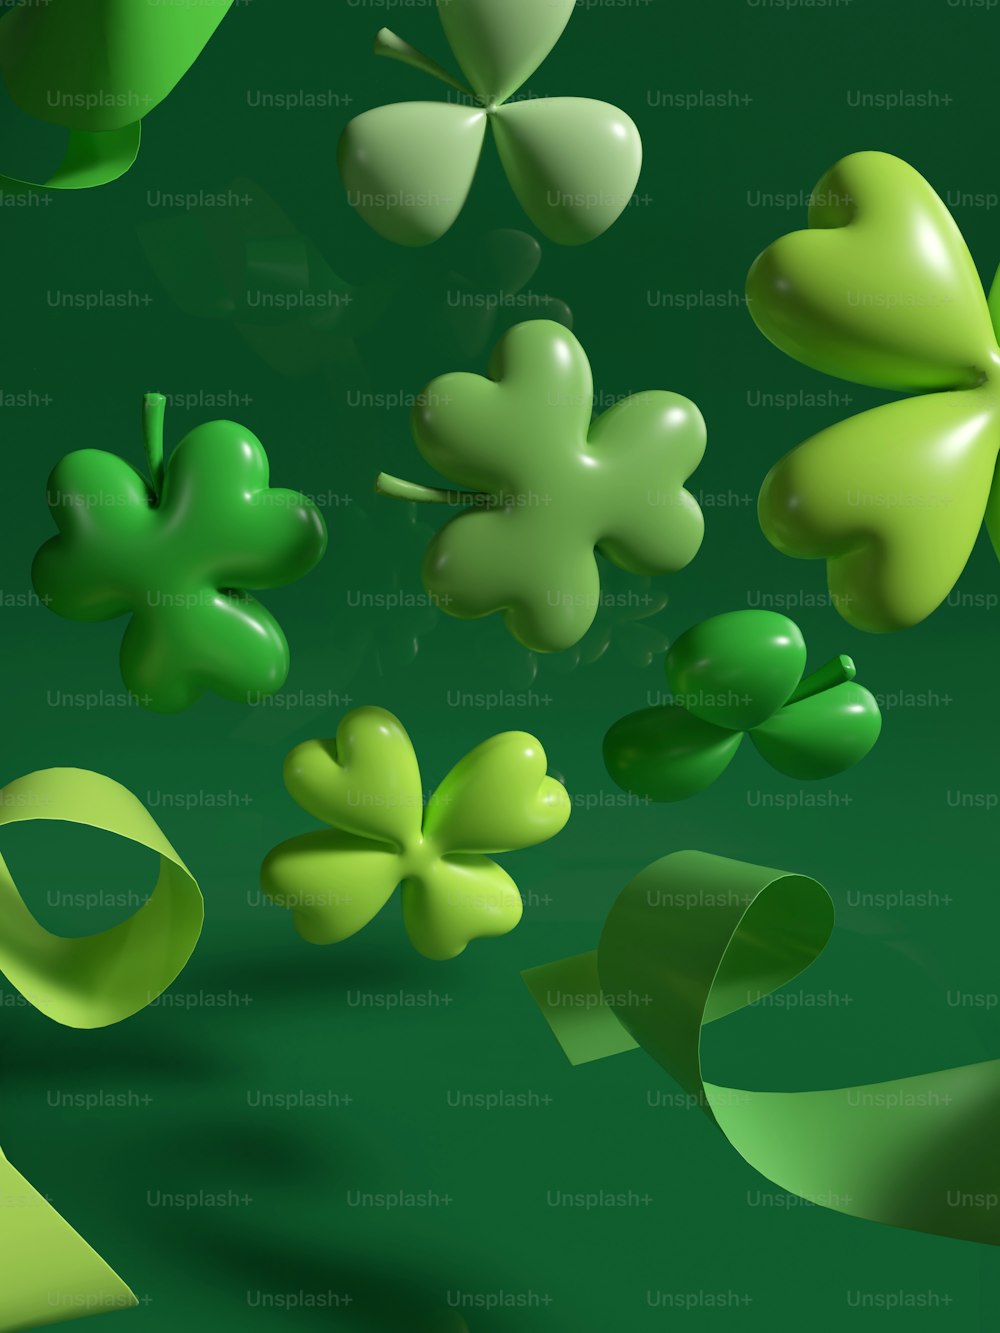 a bunch of green shamrocks floating in the air